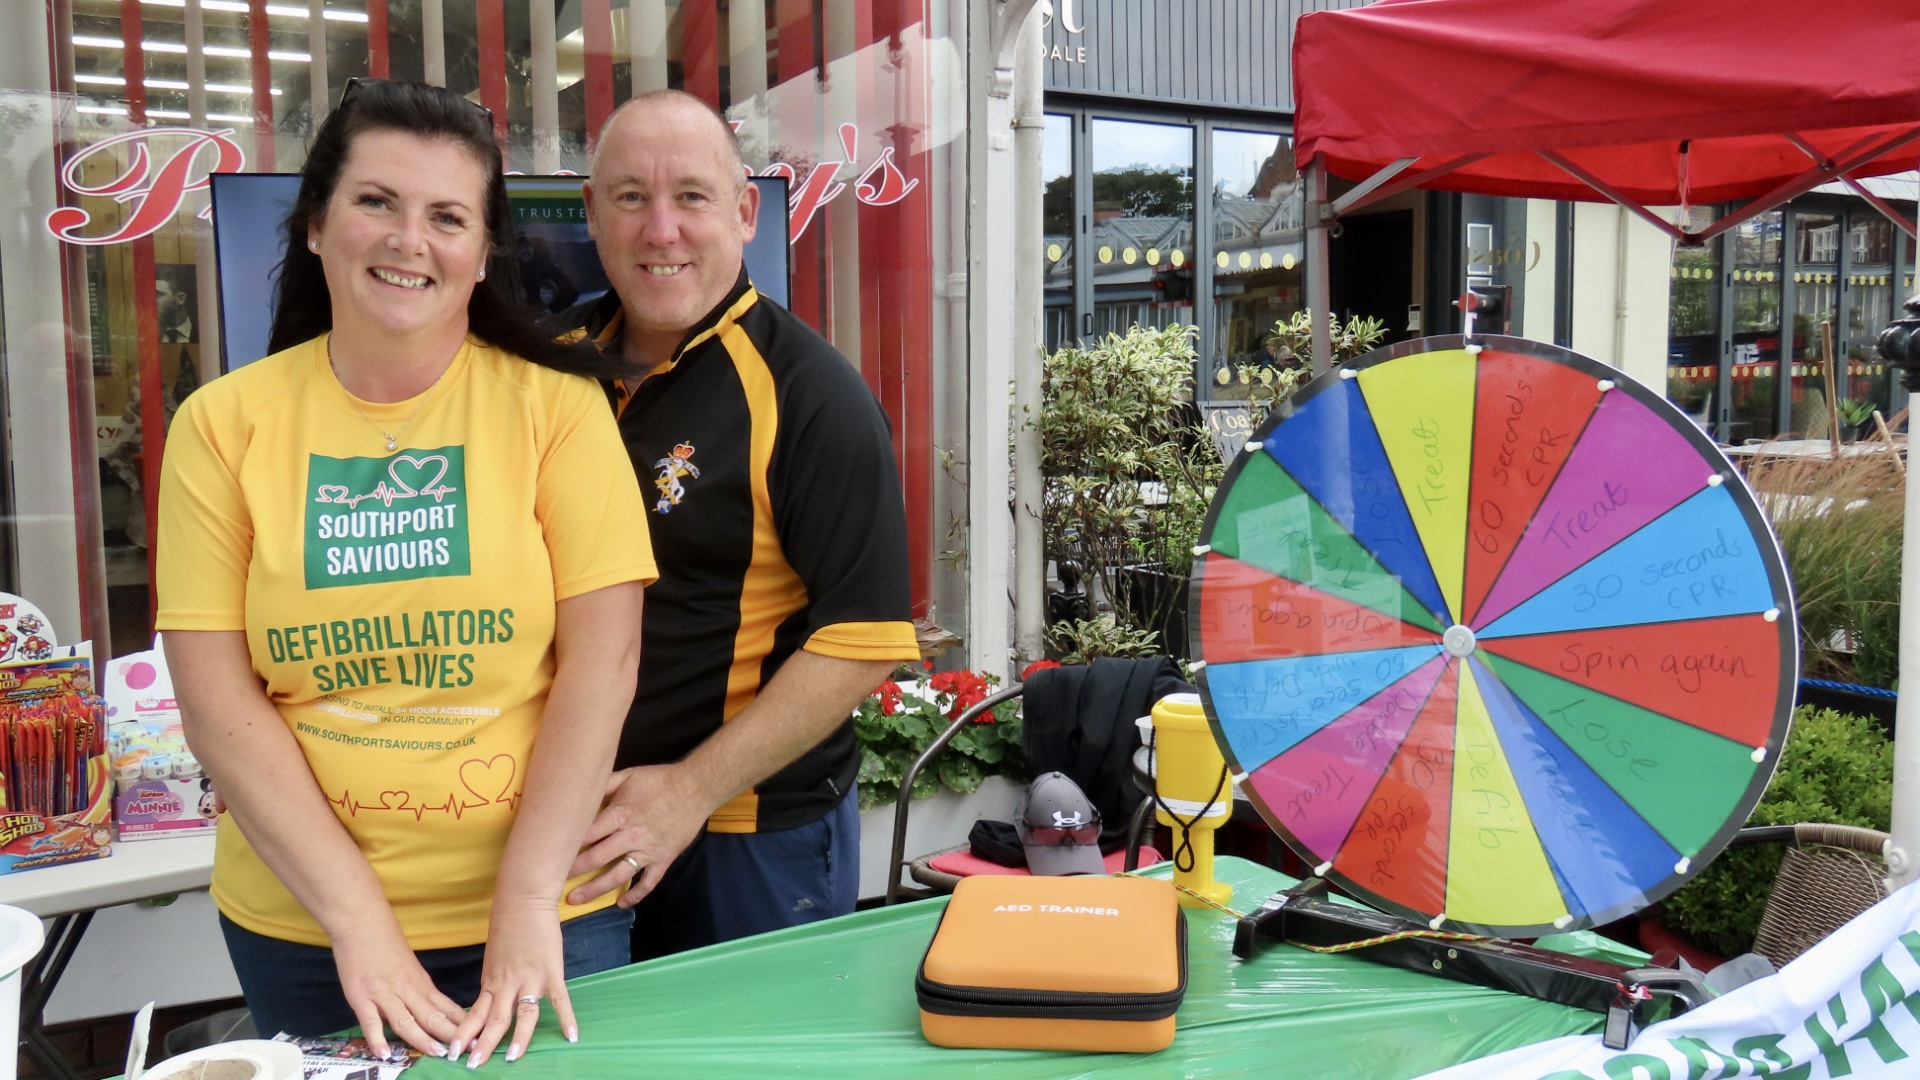 Southport Saviours at Birkdale Village Summer Fayre. Photo by Andrew Brown Stand Up For Southport